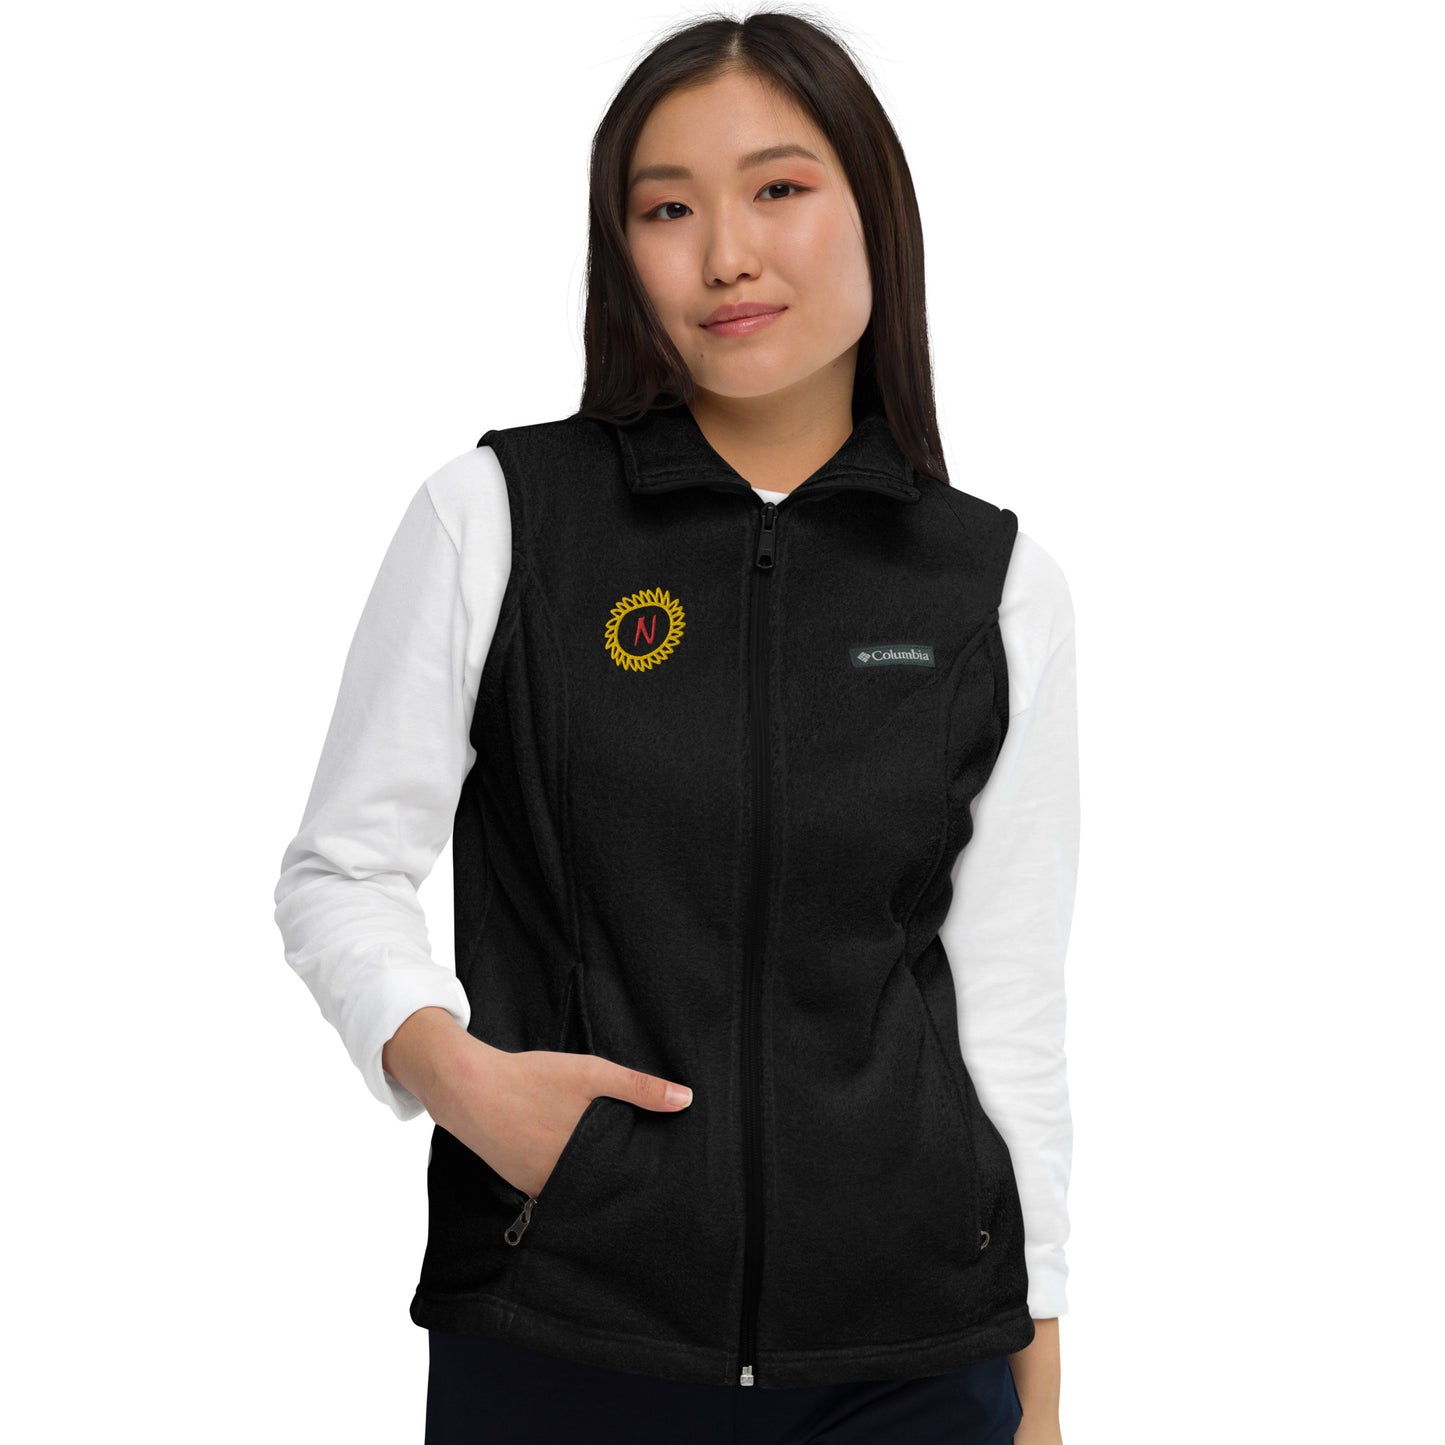 Women’s Columbia fleece vest, gold/red thread embroidery "N" in a circle